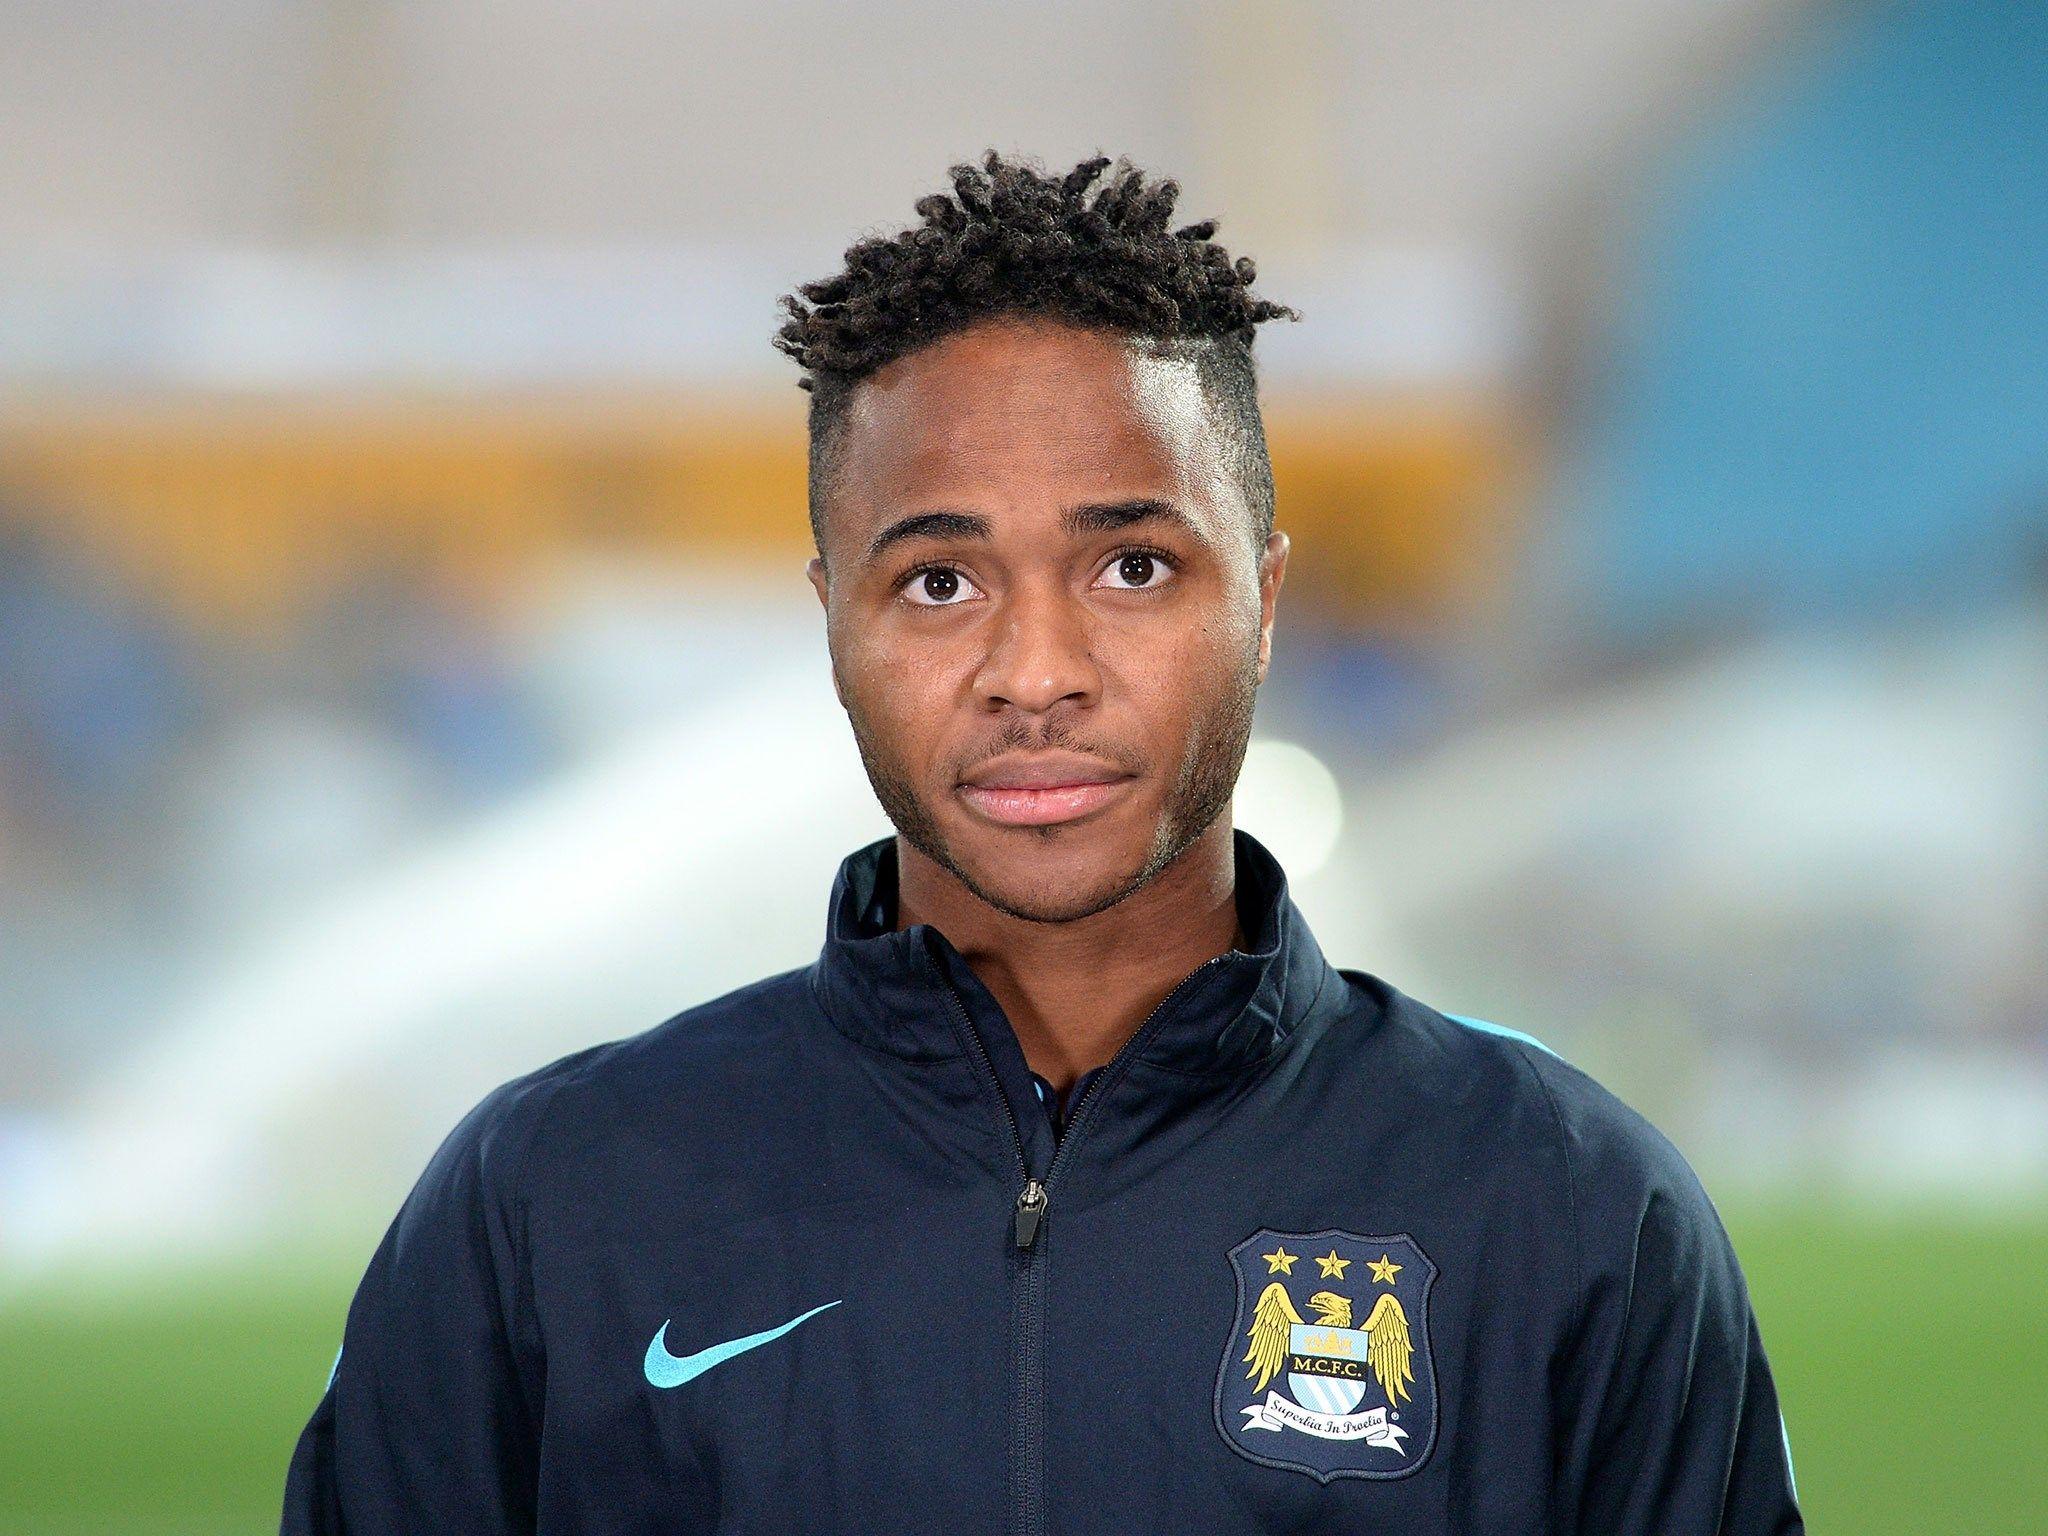 raheem sterling pic: Full HD Picture sterling category